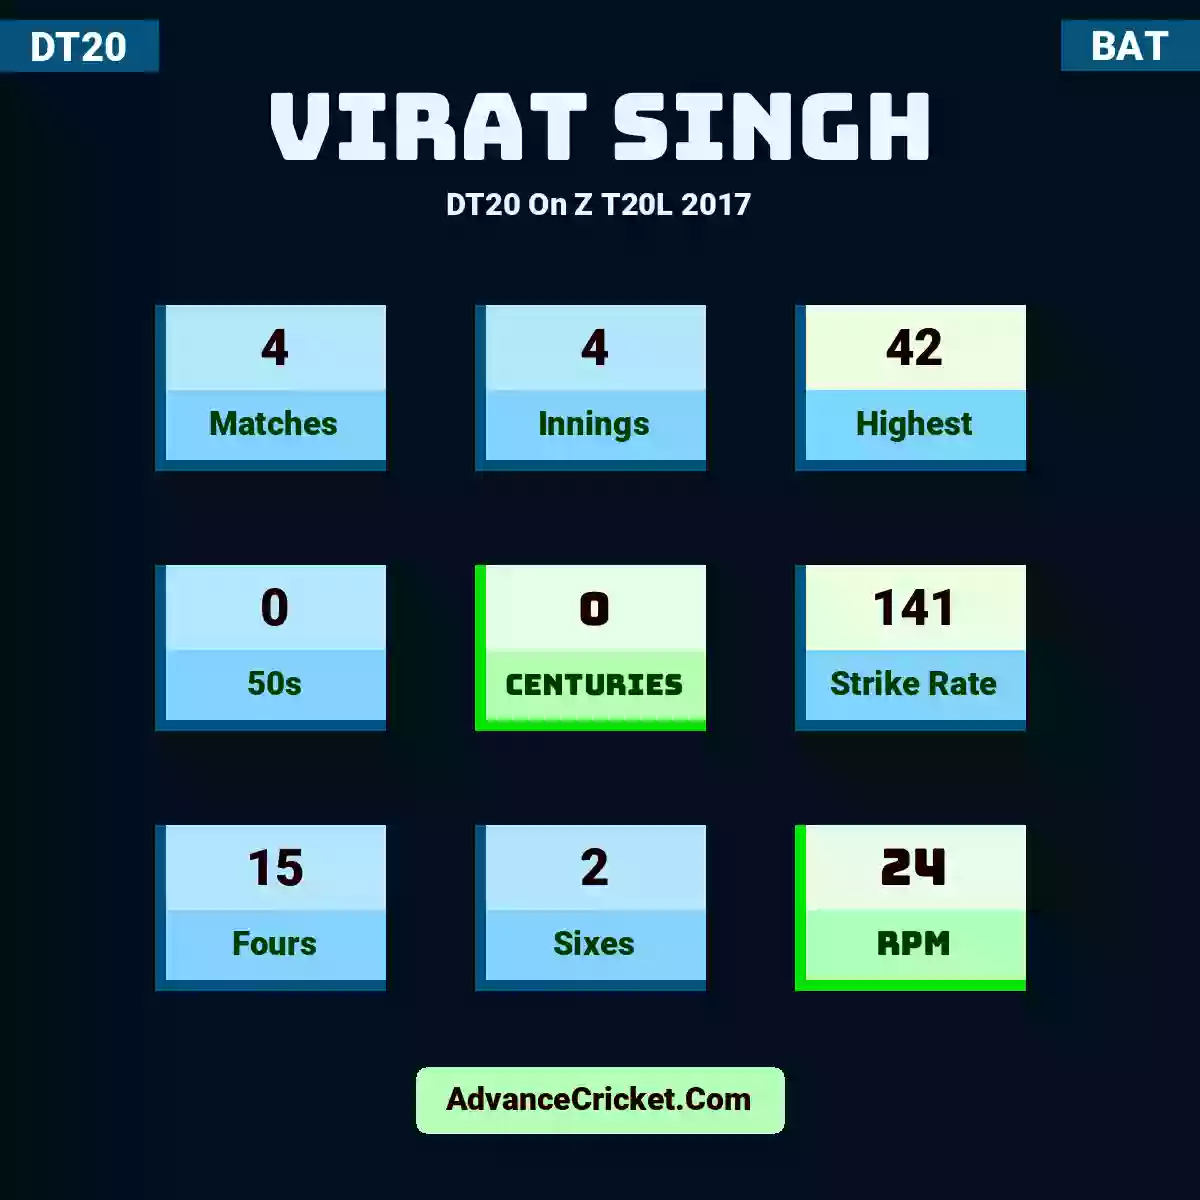 Virat Singh DT20  On Z T20L 2017, Virat Singh played 4 matches, scored 42 runs as highest, 0 half-centuries, and 0 centuries, with a strike rate of 141. V.Singh hit 15 fours and 2 sixes, with an RPM of 24.